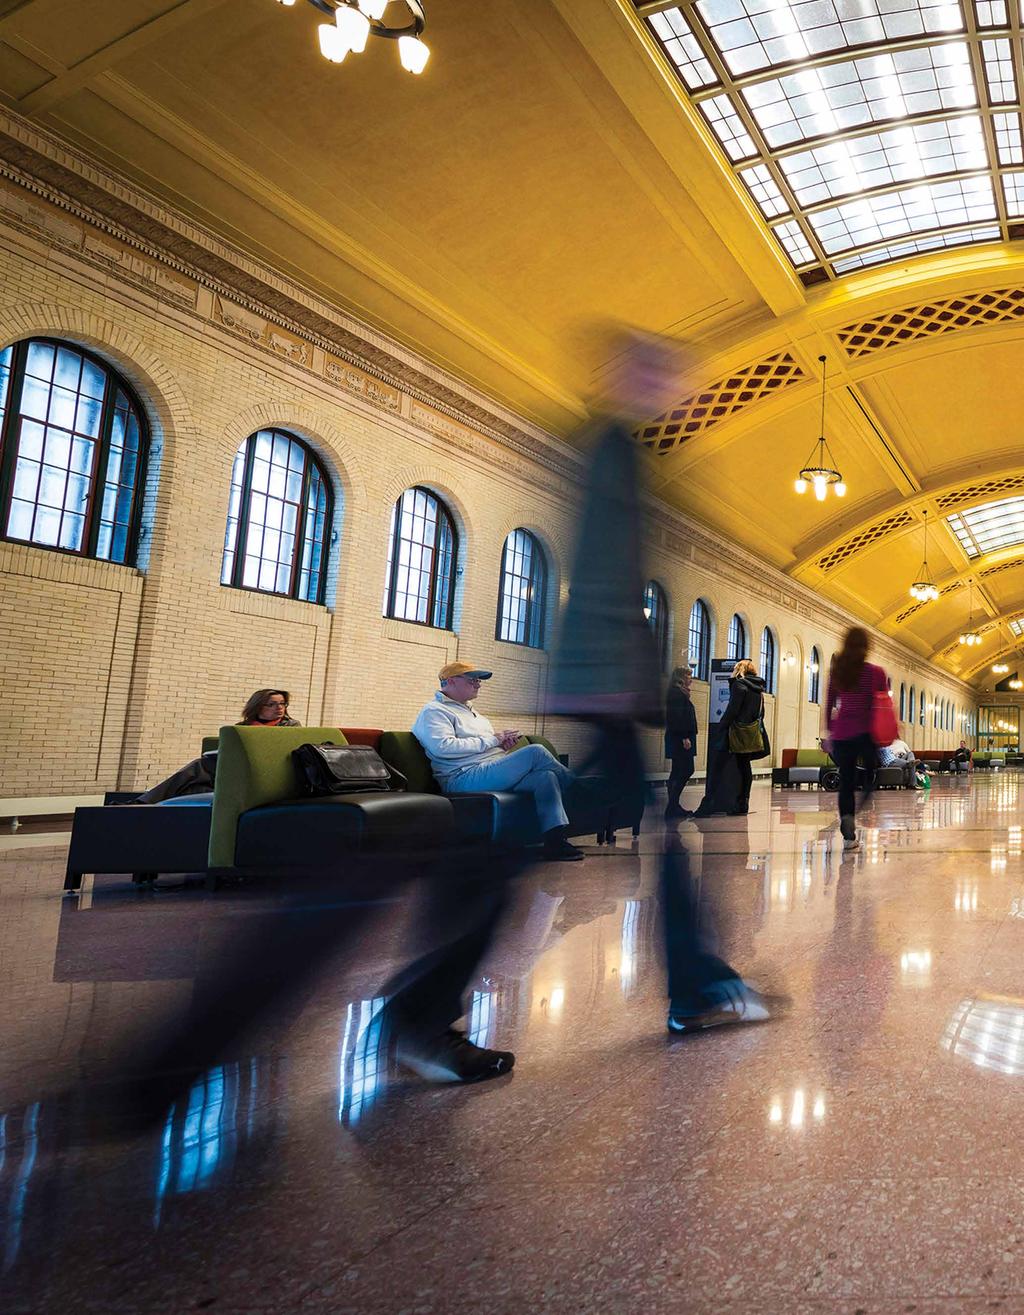 TYPES OF EVENTS Seven Spaces, Unlimited Possibilities Any event becomes a big event at Union Depot.